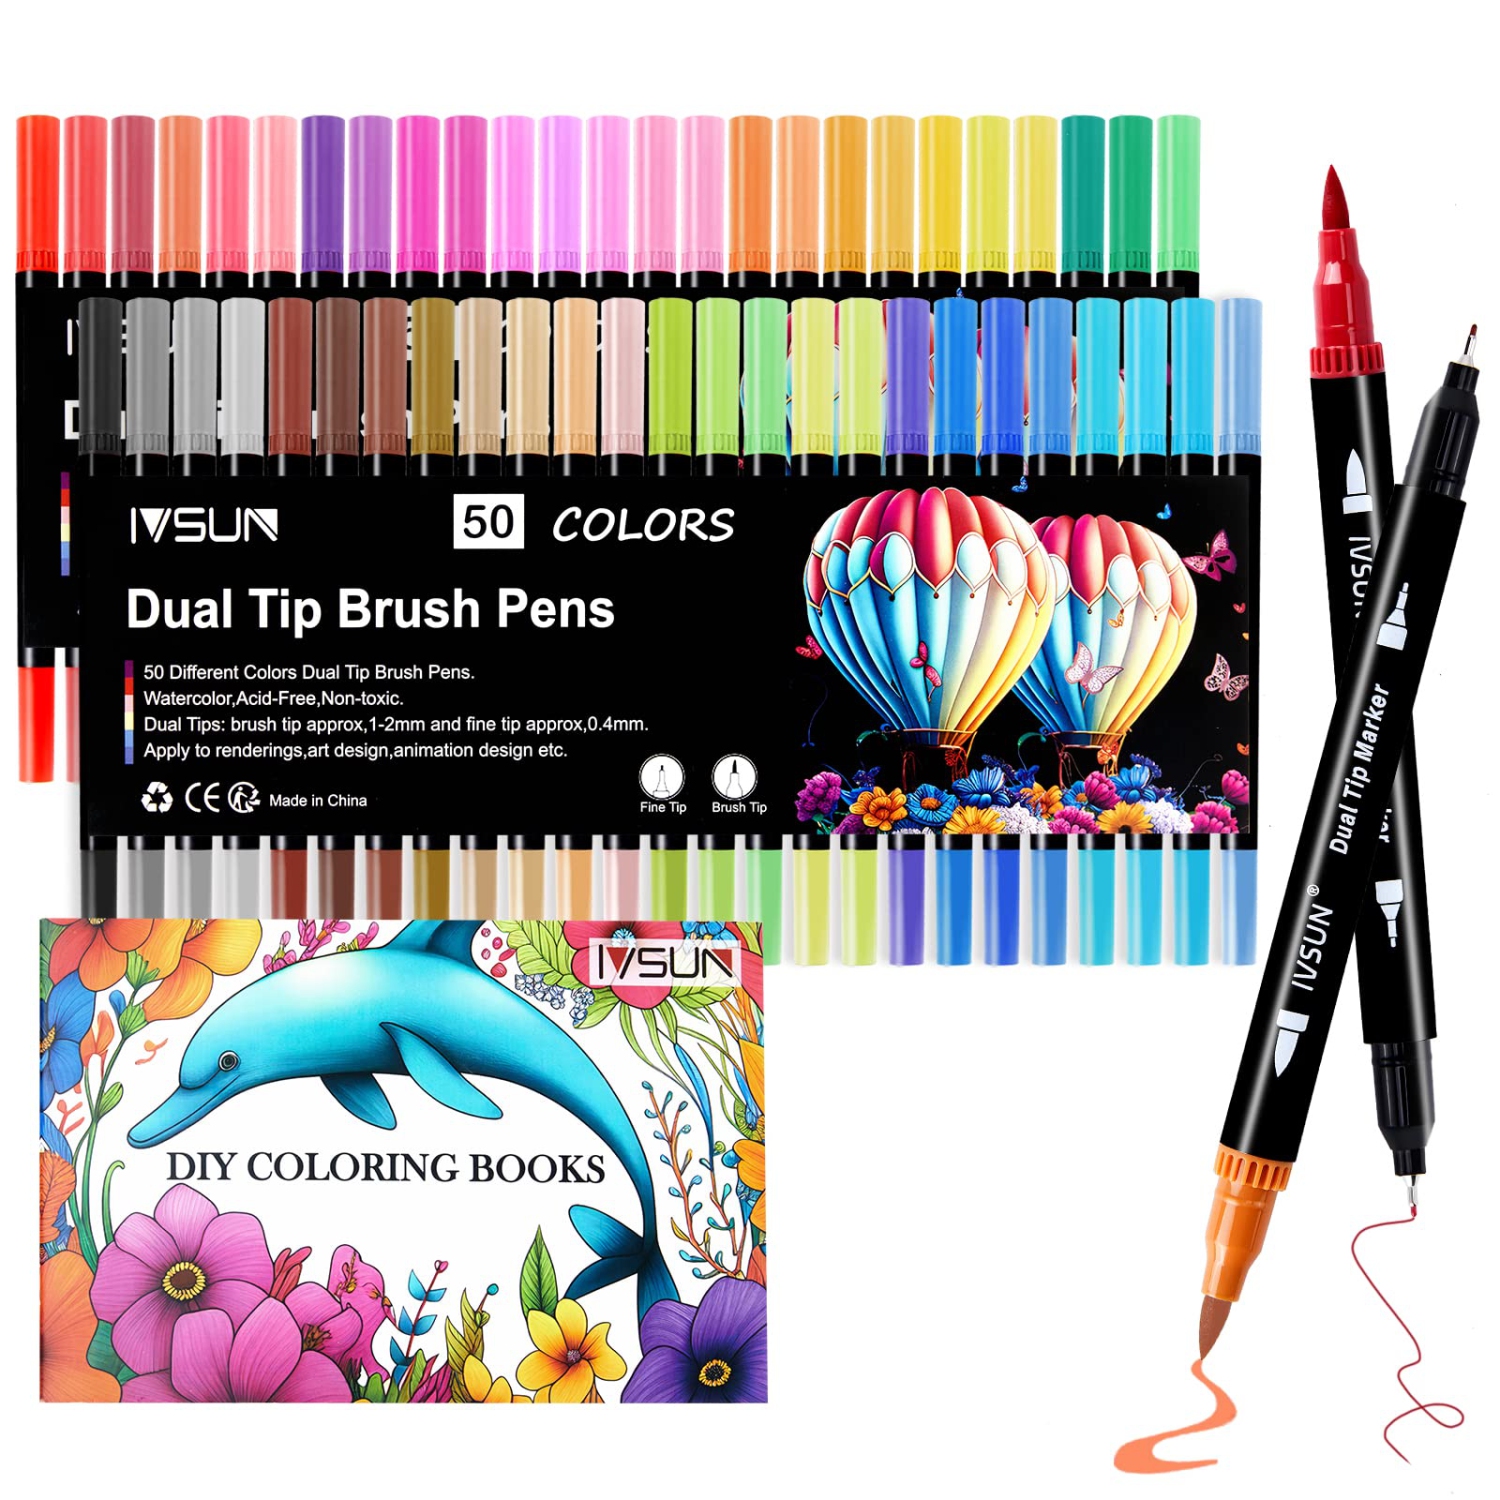 Colorful Creations: 50 Dual Tip Brush Pens for Artistic Expression and Productivity - Perfect for Coloring, Note Taking, and Planning